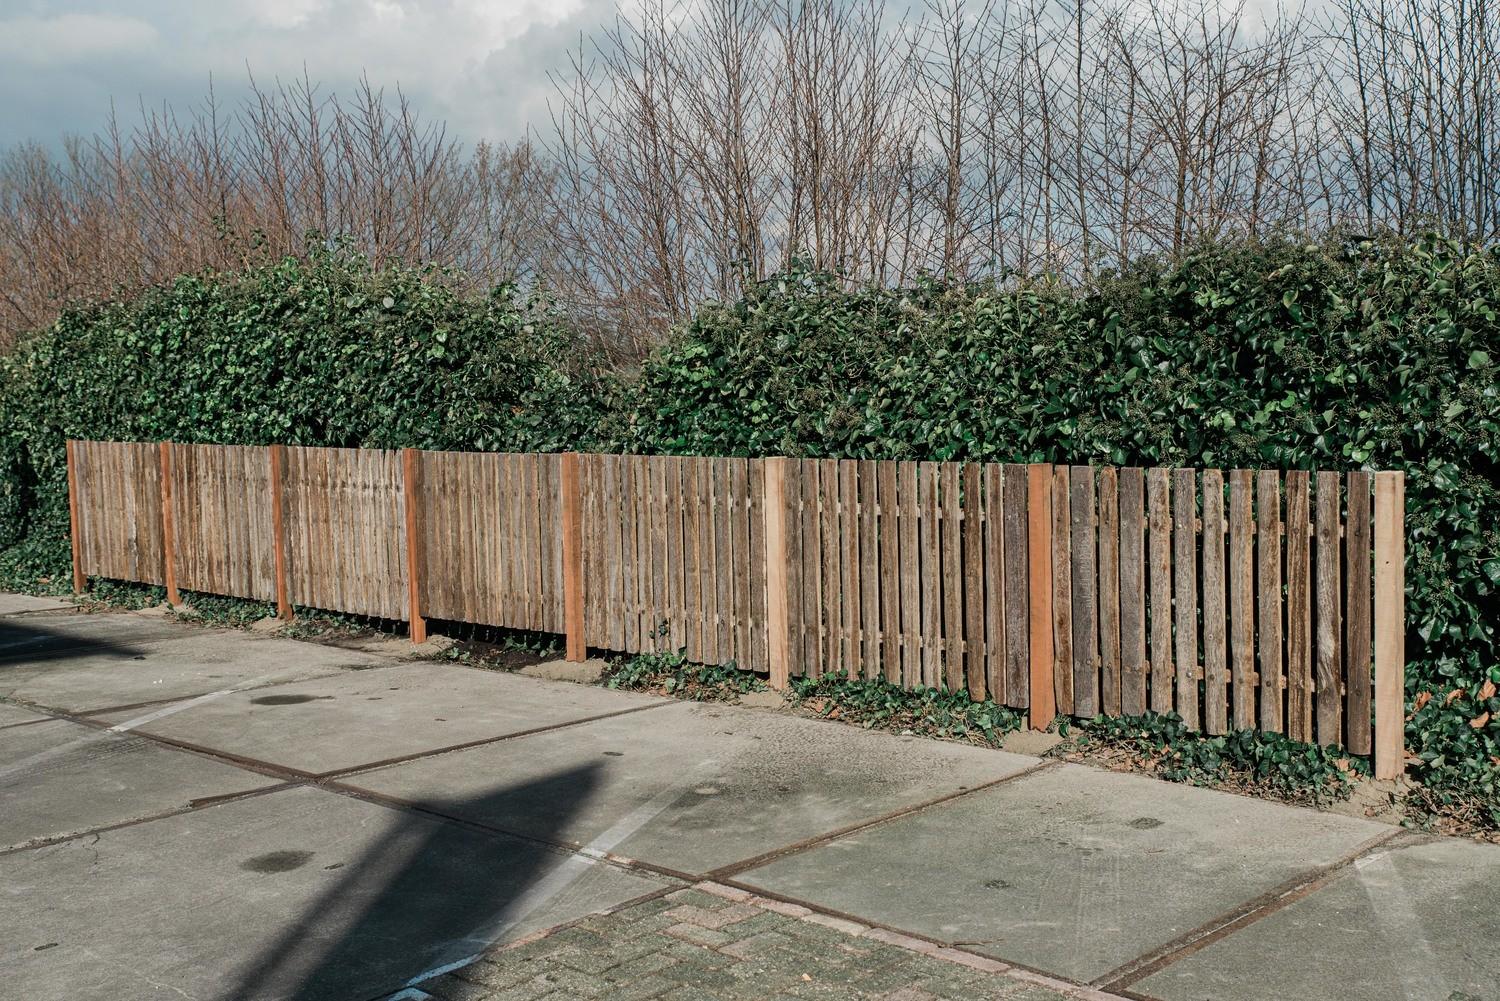  Wooden fencing developed with old stable grids